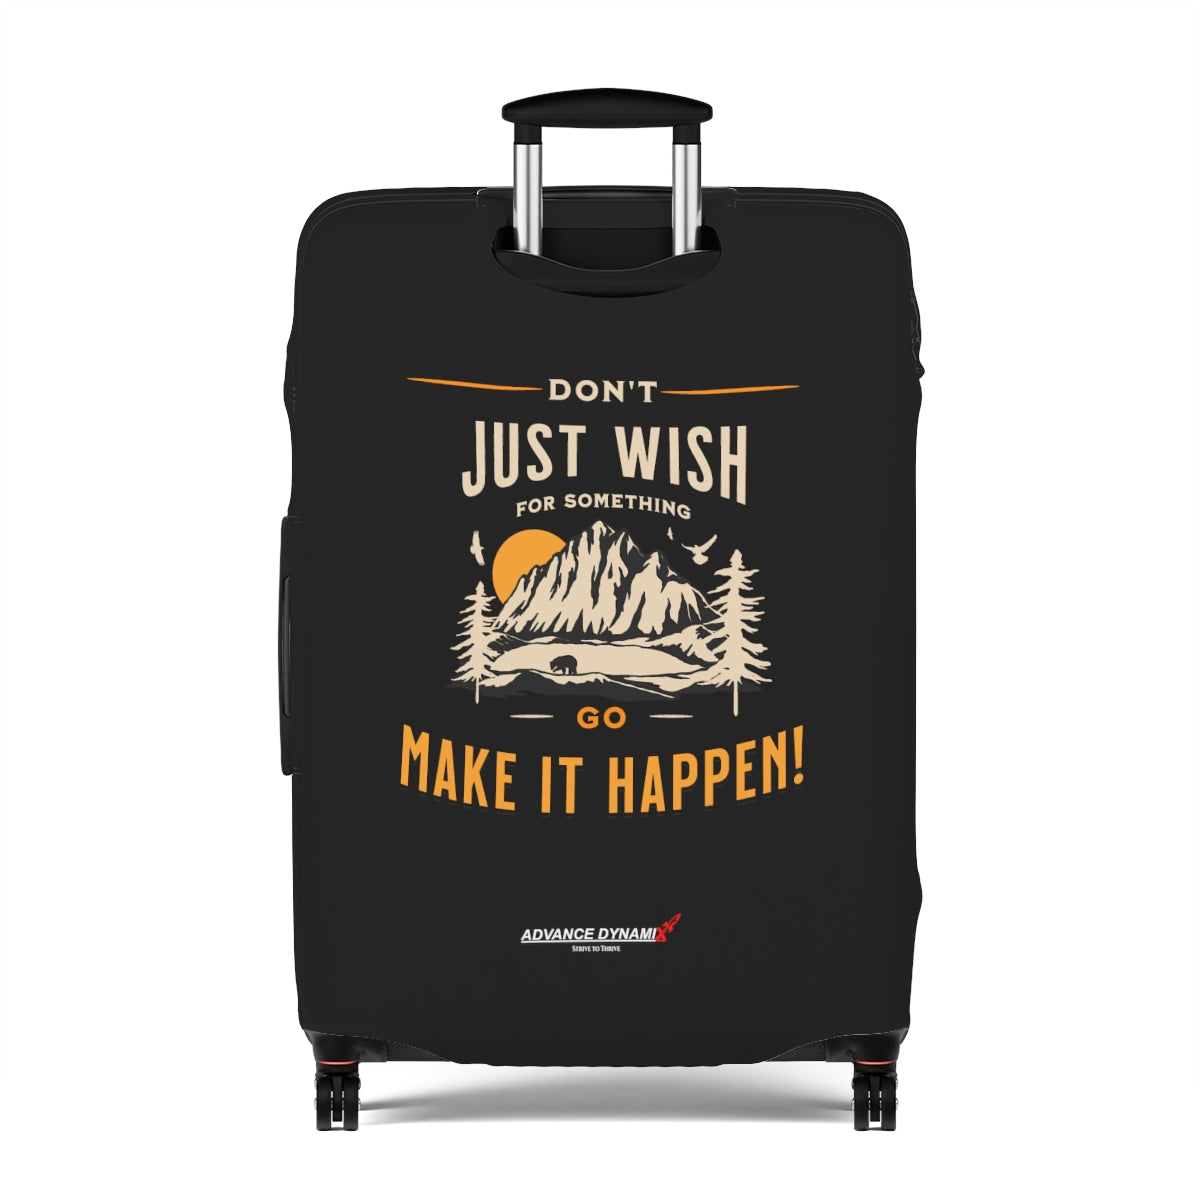 Don't just wish for something, go make it happen. - Luggage Covers Infused with Advance Dynamix Add-A-Tude - Tell the world!